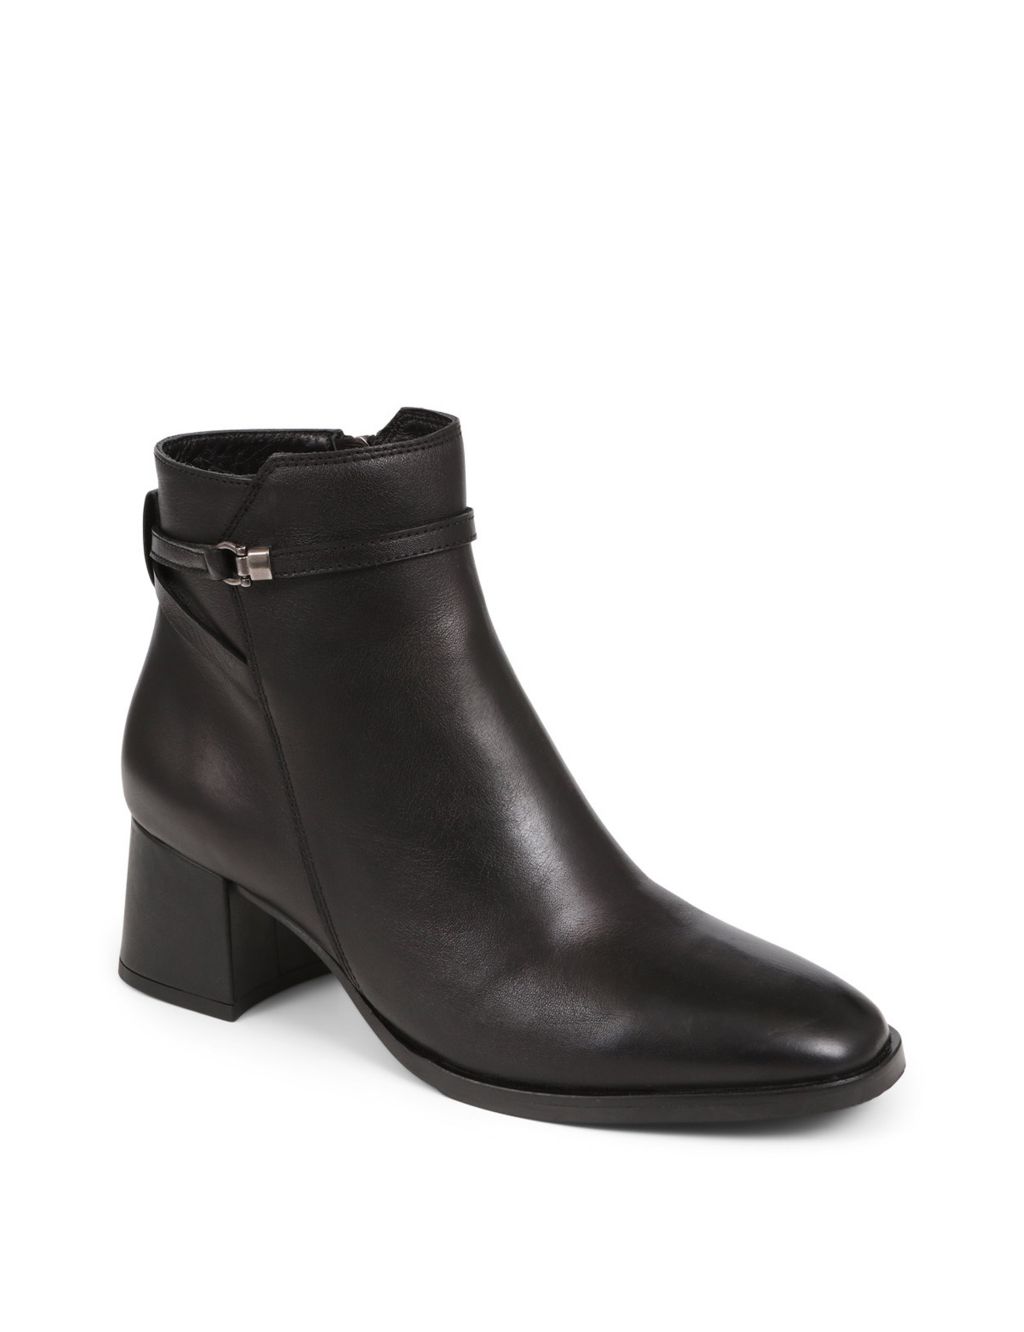 Leather Block Heel Ankle Boots image 3